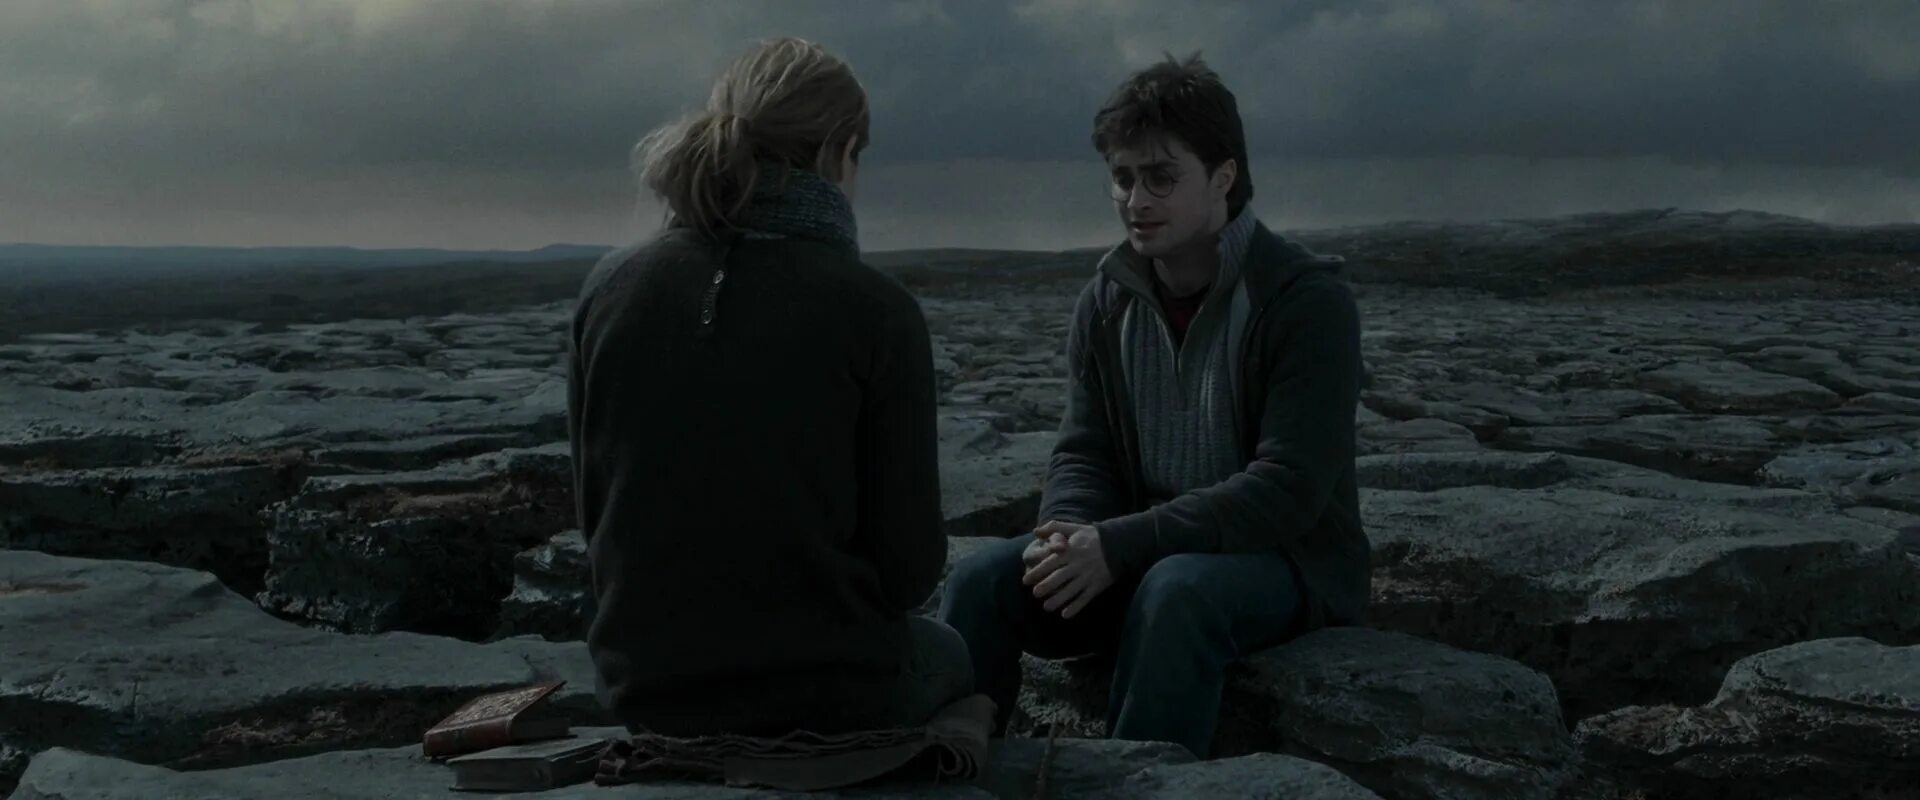 Harry Potter and the Deathly Hallows: Part 1 (2010). Гермиона дары смерти. Harry Potter and Deathly Hallows Part 1 Hermione. Deathly hallow part 1